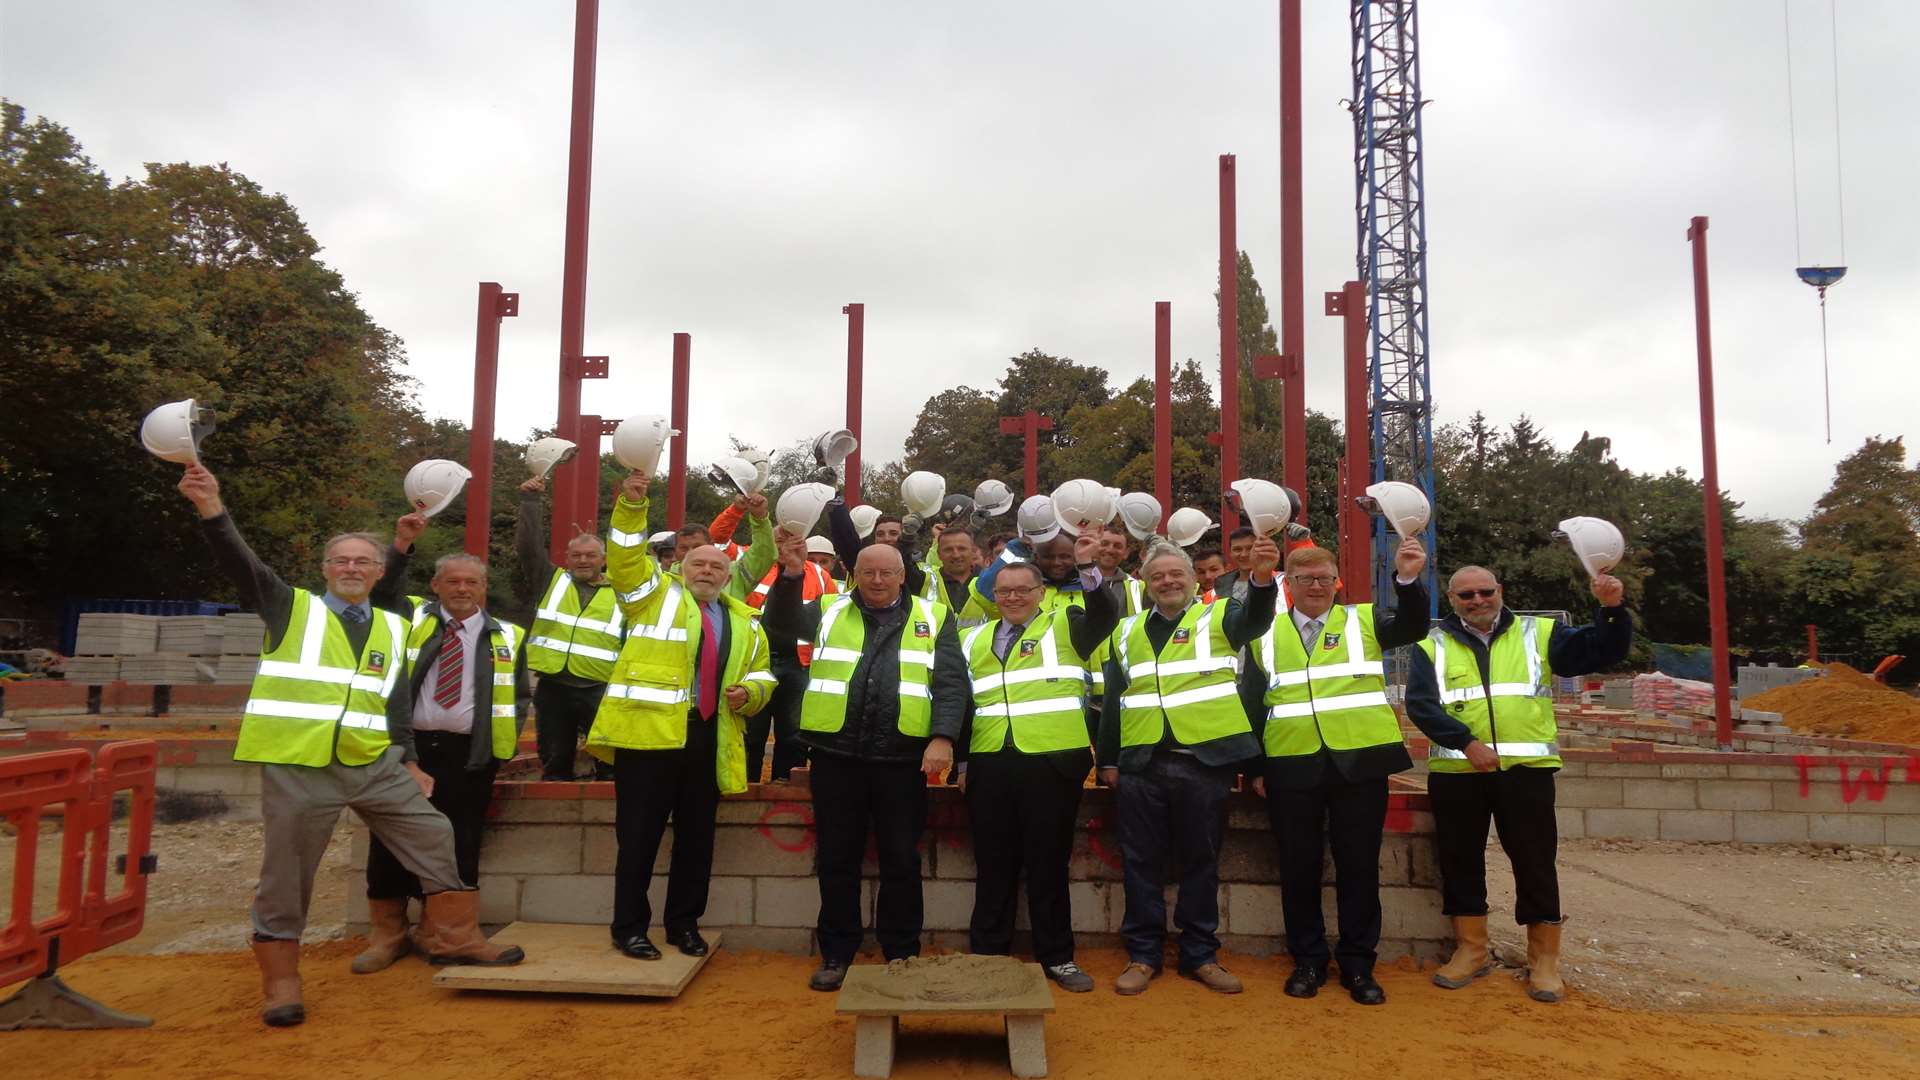 Work starts on the new care home